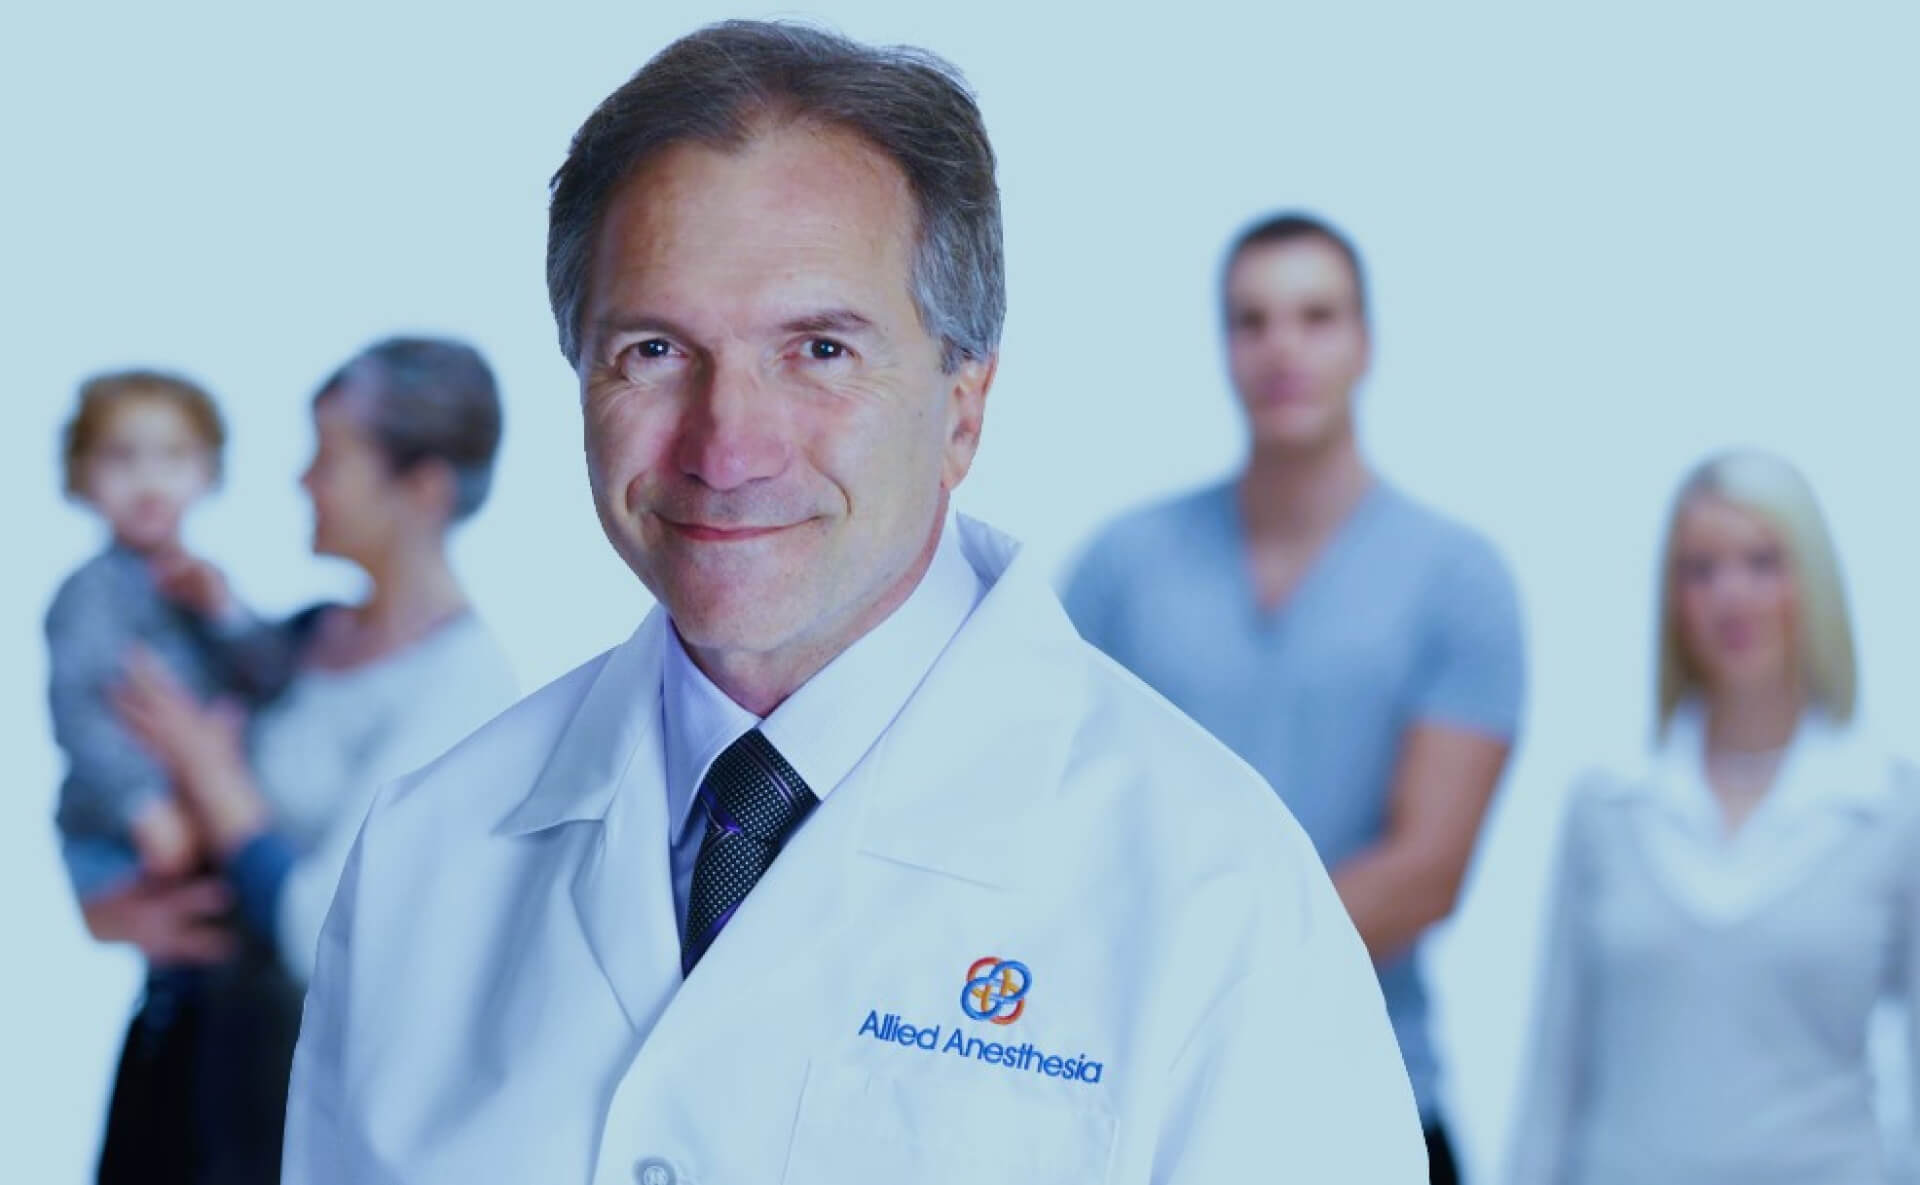 Our Physicians | Allied Anesthesia Medical Group